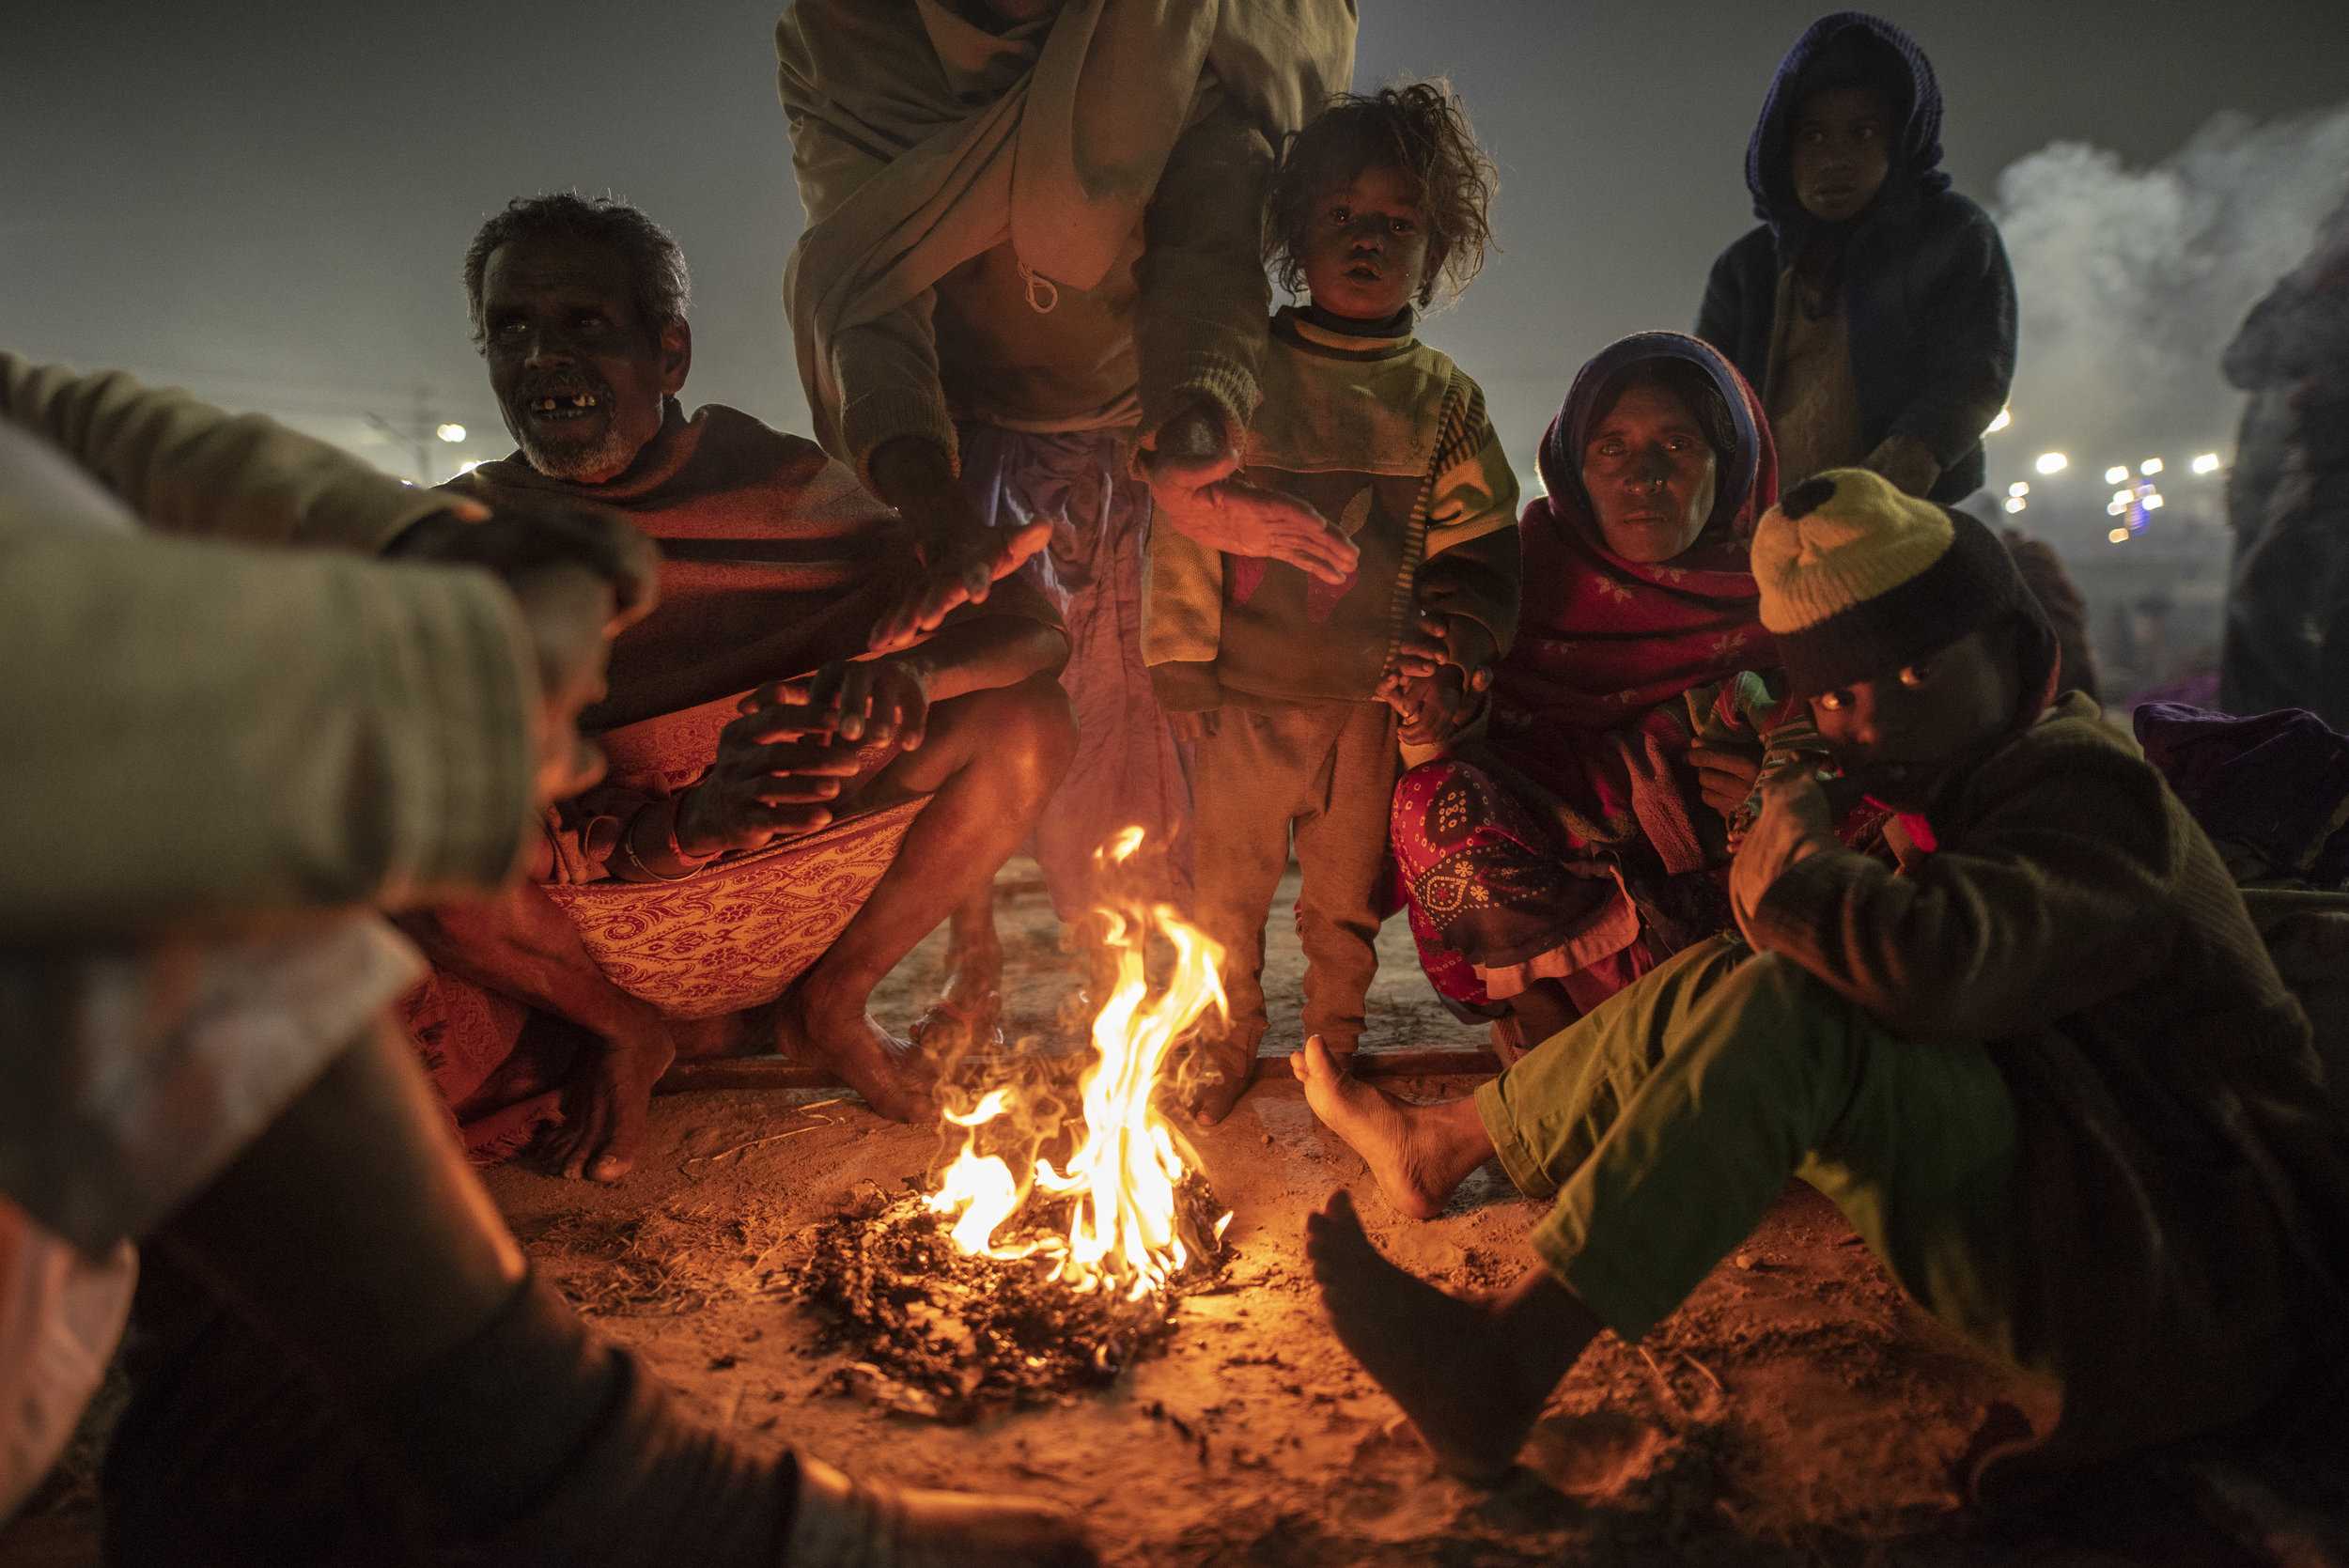  Huddled by a fire, a family gathers on the outskirts of the Mela, preparing for their morning walk to Ganga. 